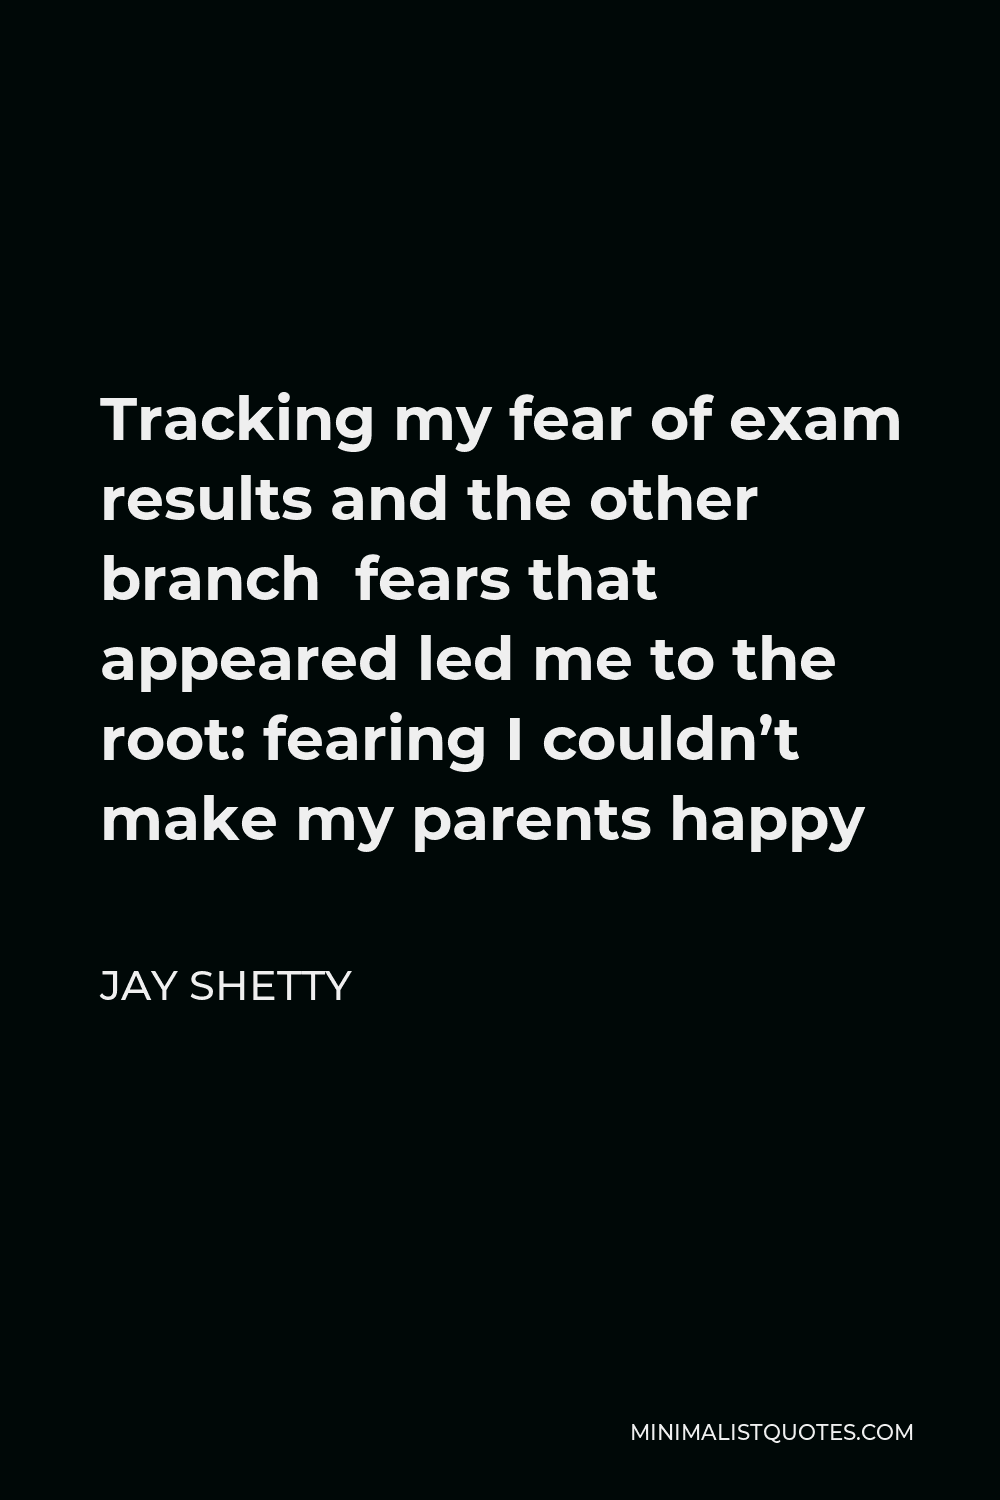 Jay Shetty Quote - Tracking my fear of exam results and the other branch fears that appeared led me to the root: fearing I couldn’t make my parents happy